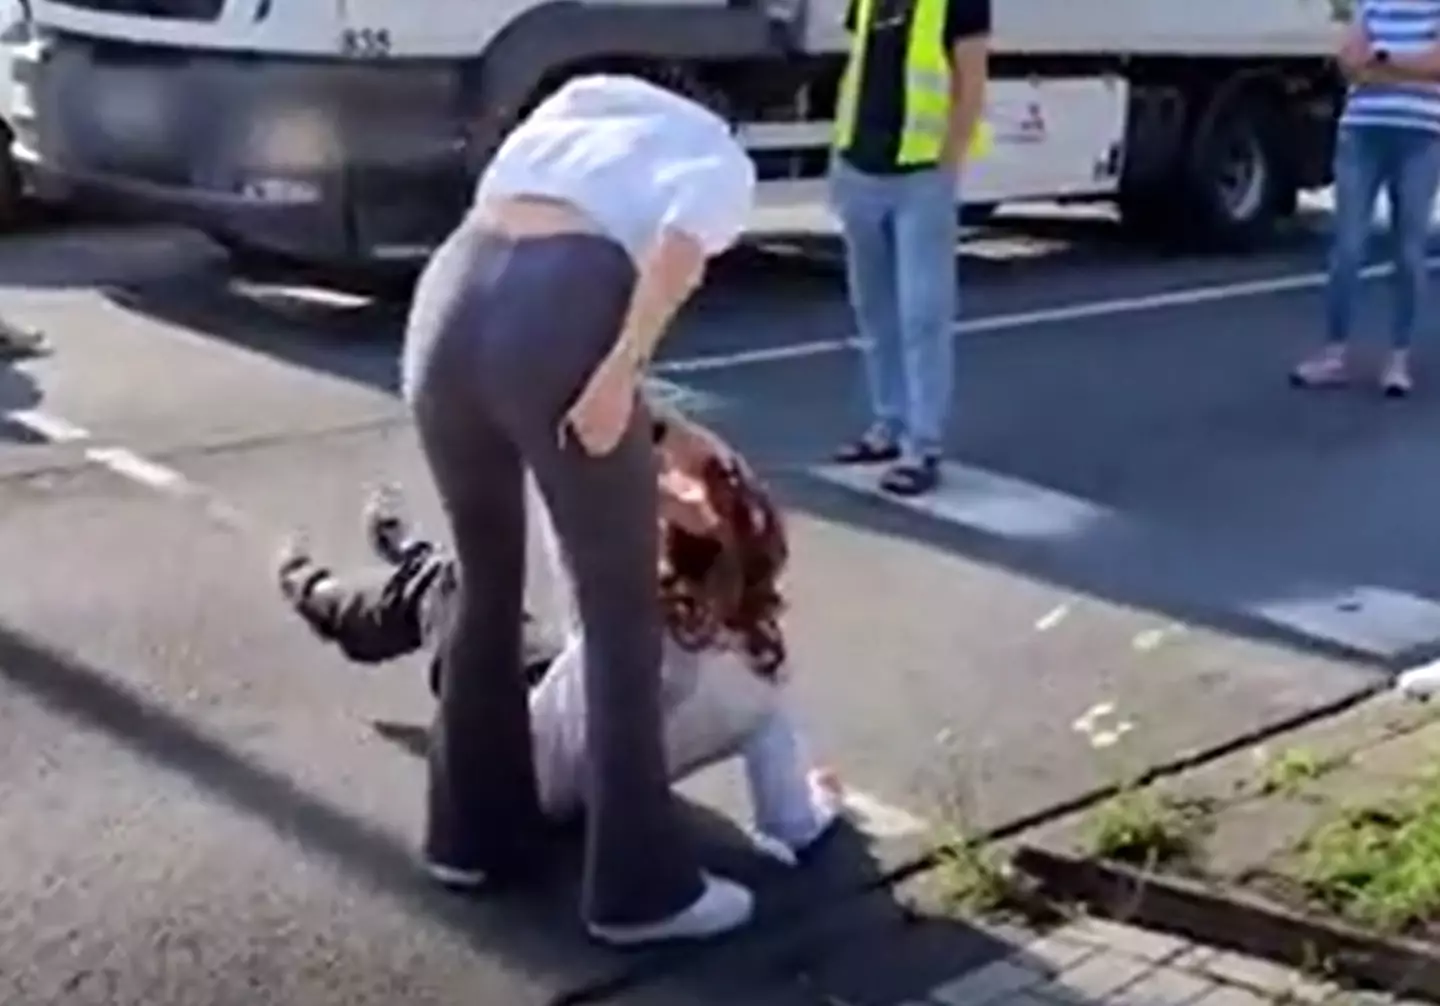 In Germany a climate change protestor was dragged by her hair multiple times.